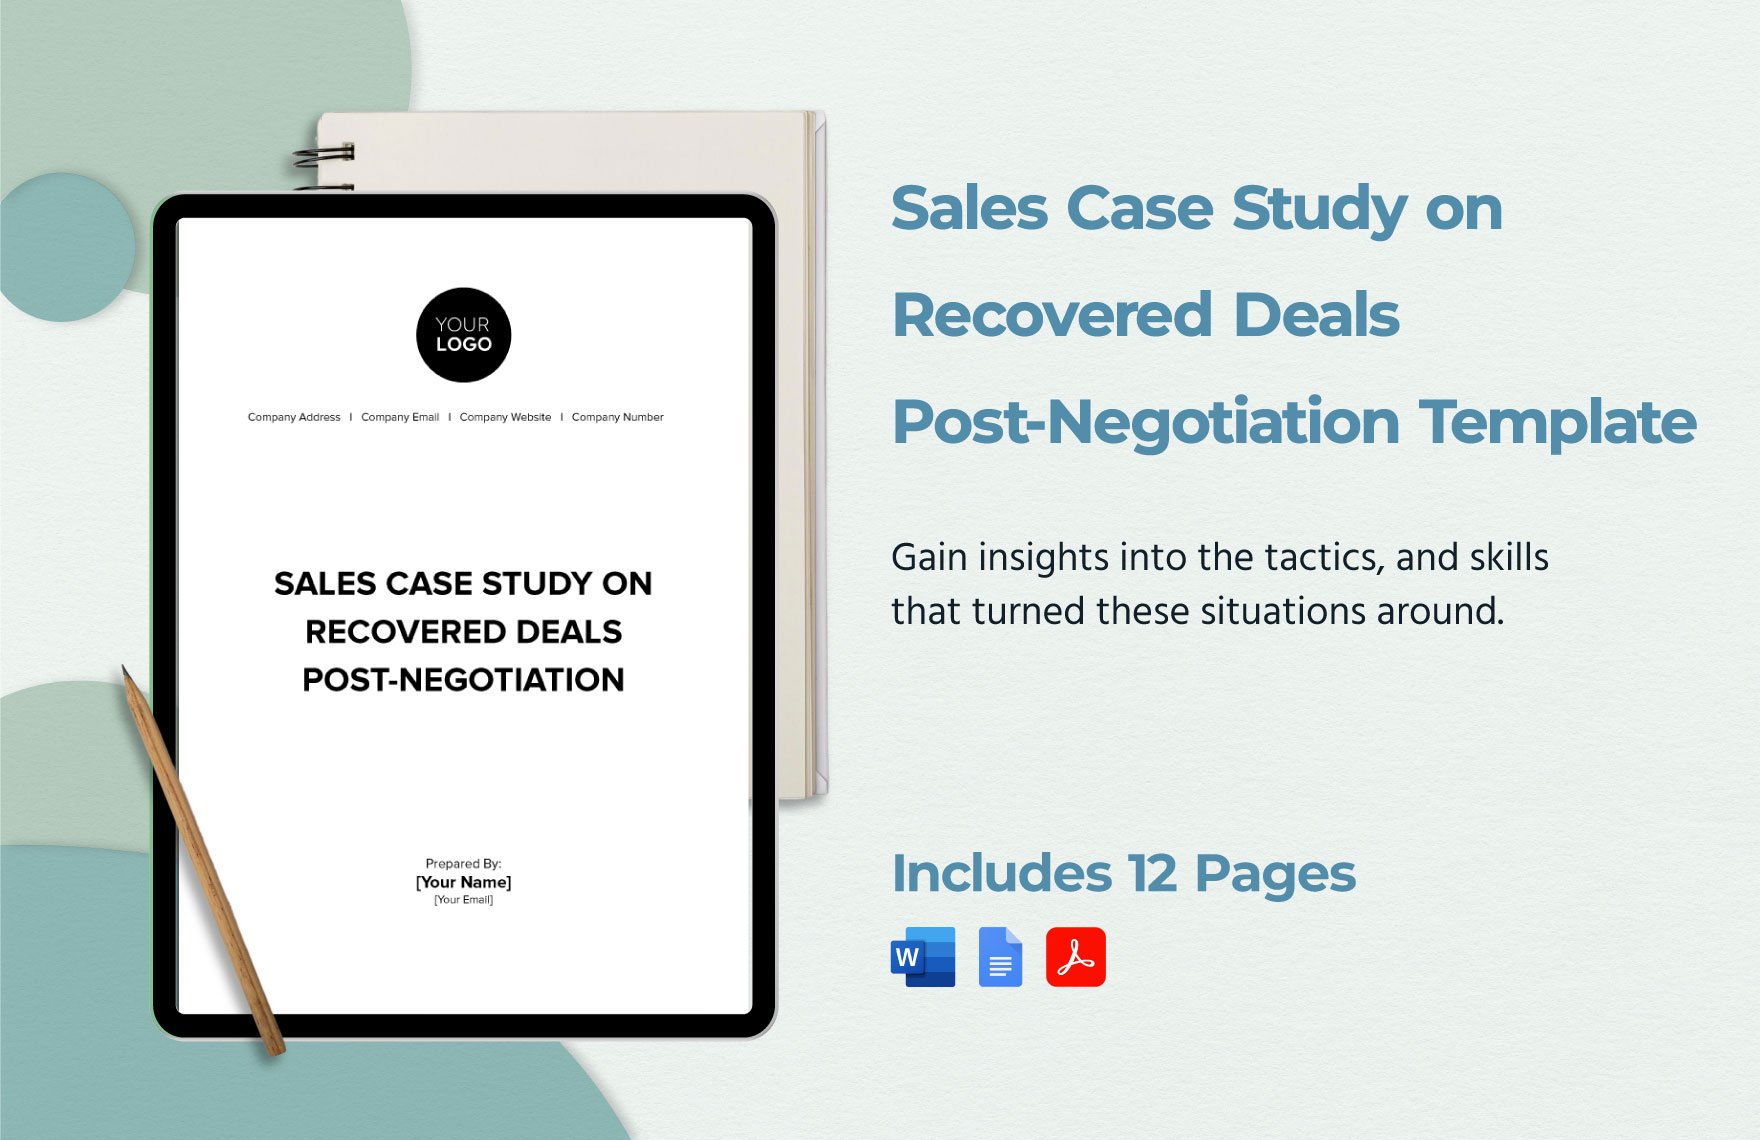 Sales Case Study on Recovered Deals Post-Negotiation Template